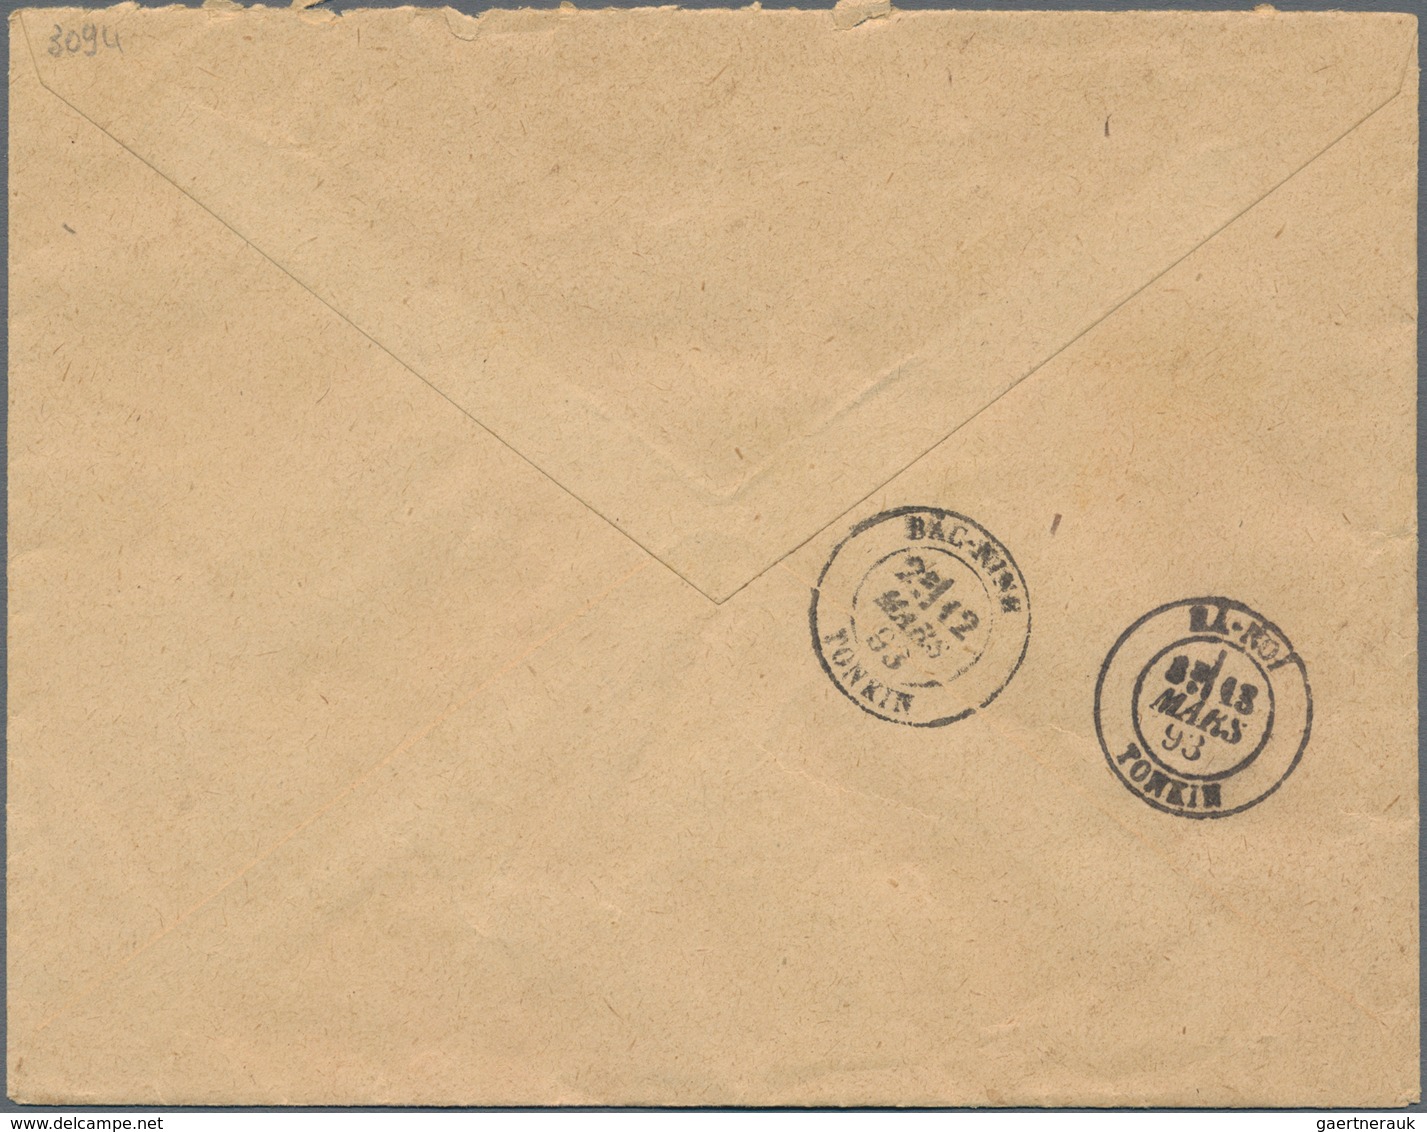 Französisch-Indochina: 1892/93, correspondence of 5 covers to chancellor of Residency of Govt. Gener